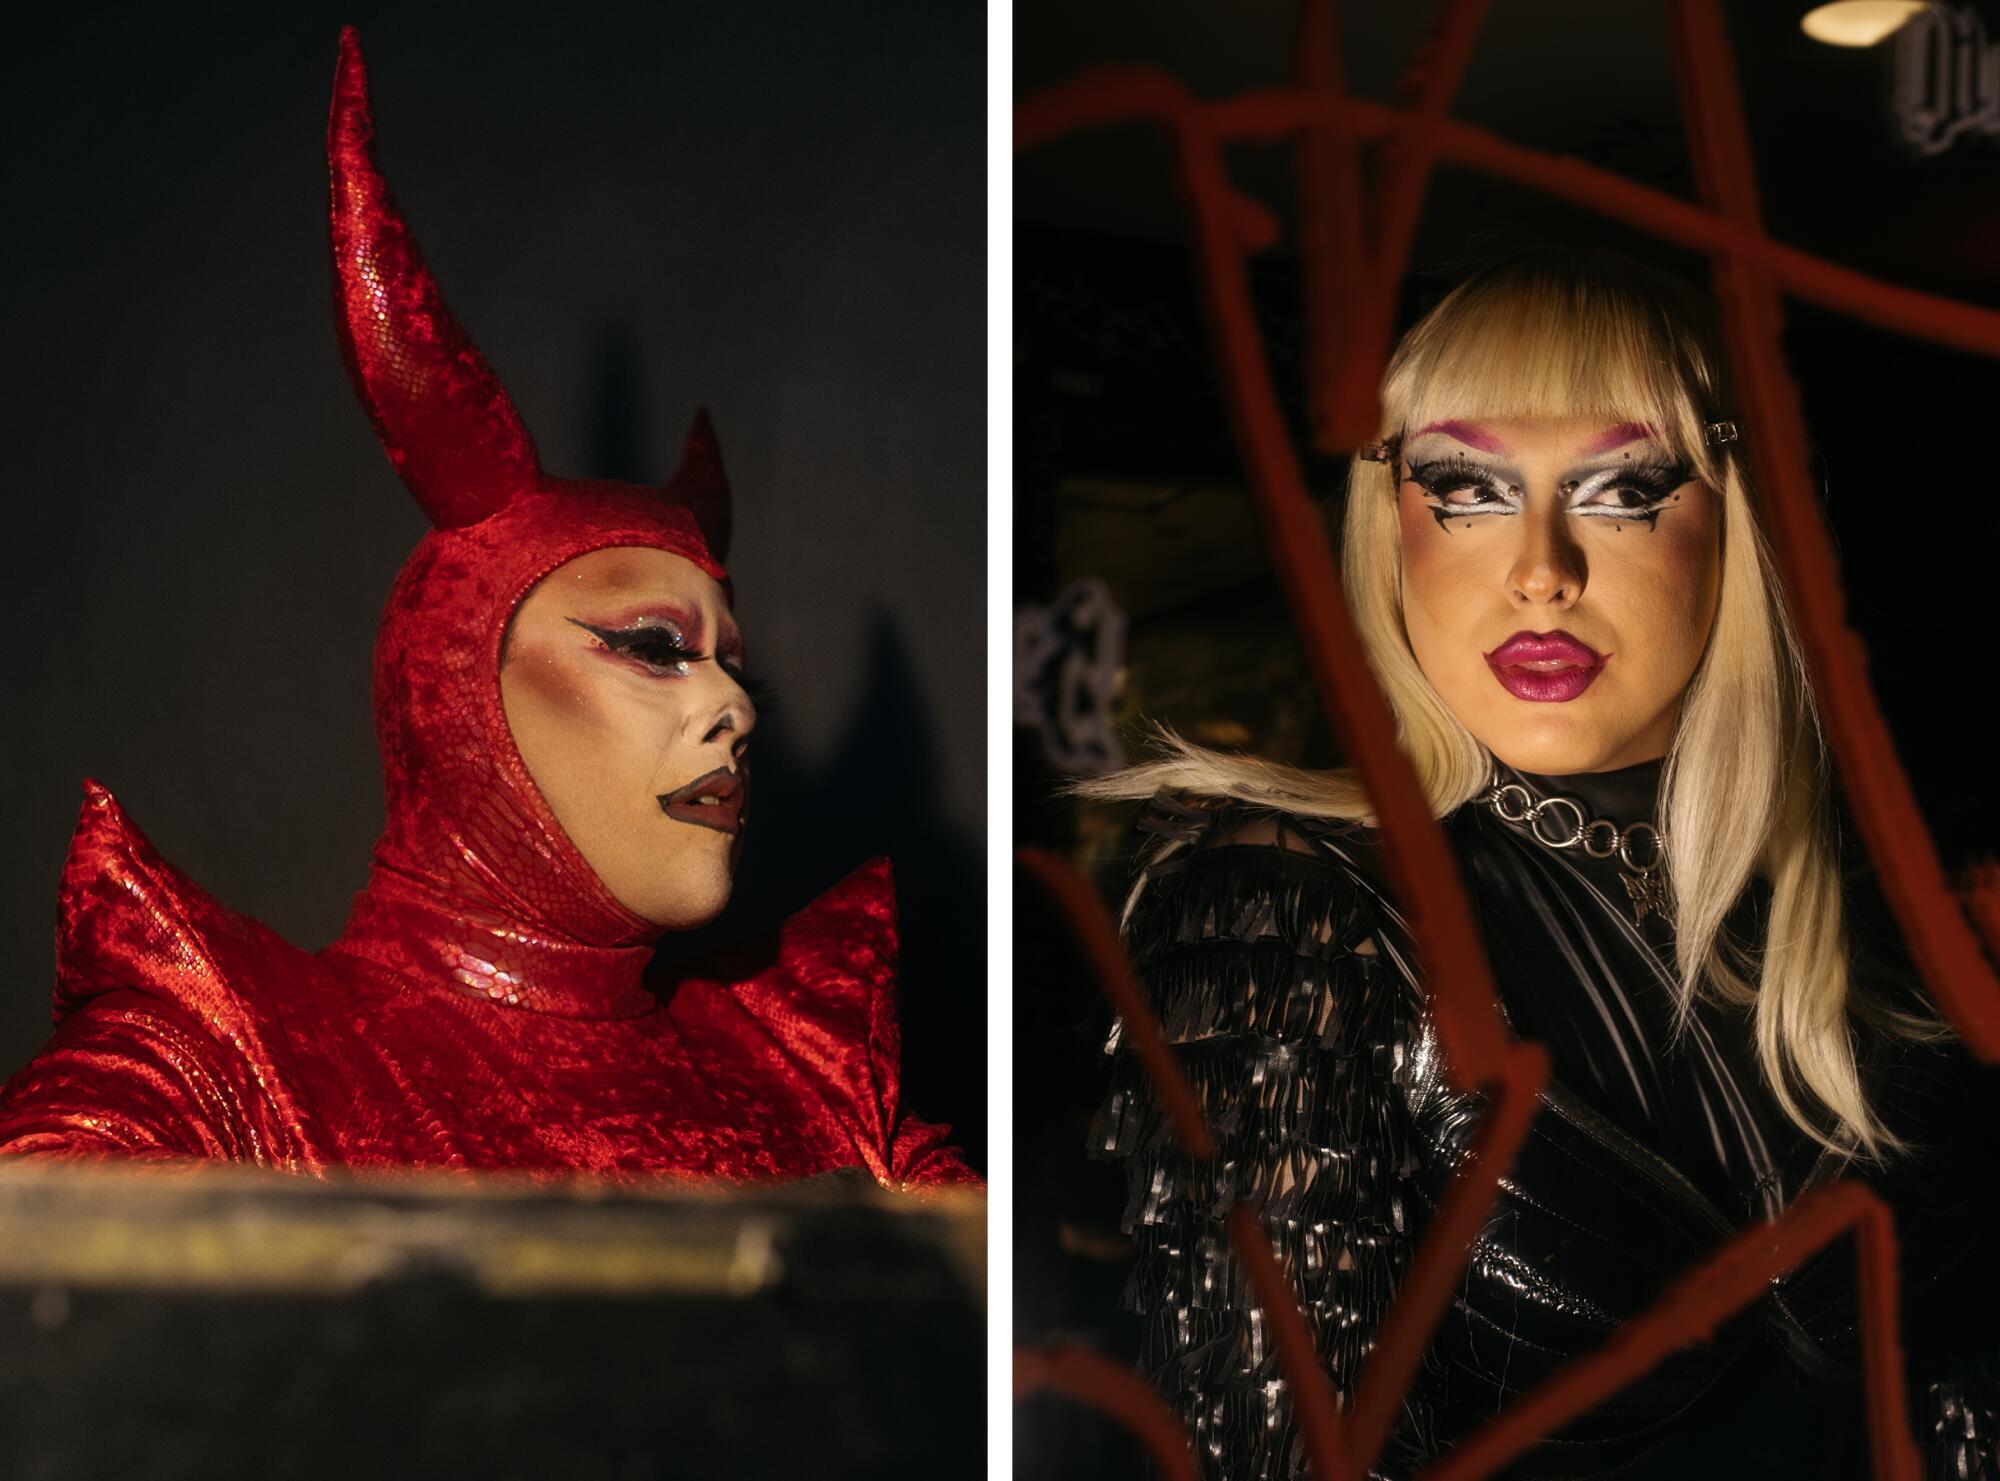 Side-by-side portraits of a person dressed in a devil suit and a heavily made-up blond woman at Heav3n.